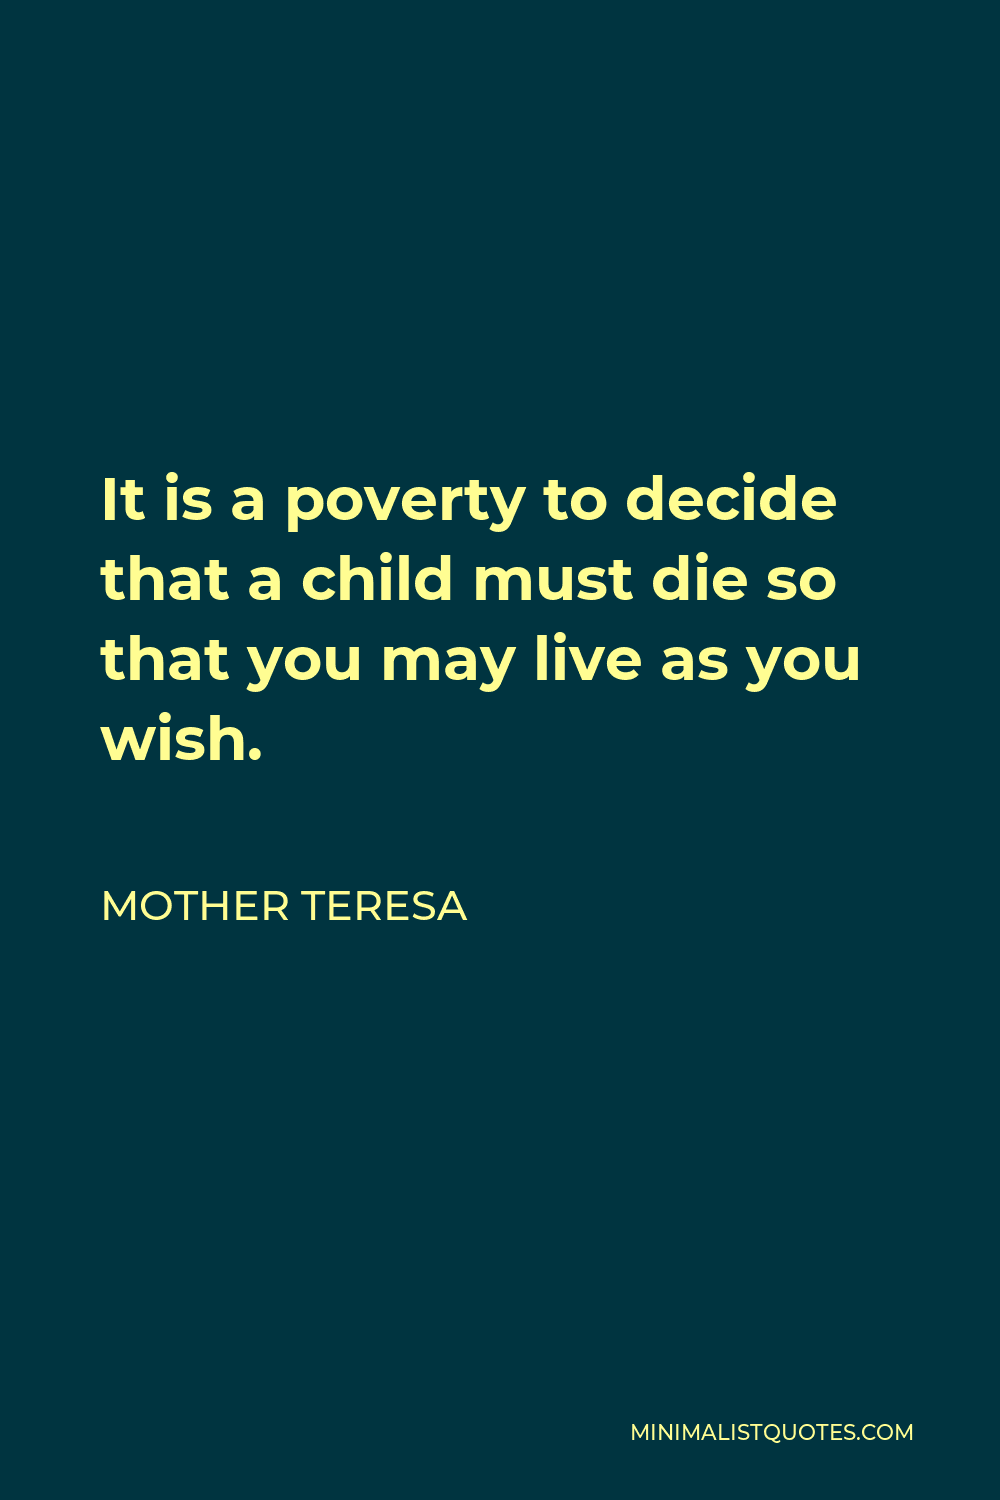 Mother Teresa Quote - It is a poverty to decide that a child must die so that you may live as you wish.